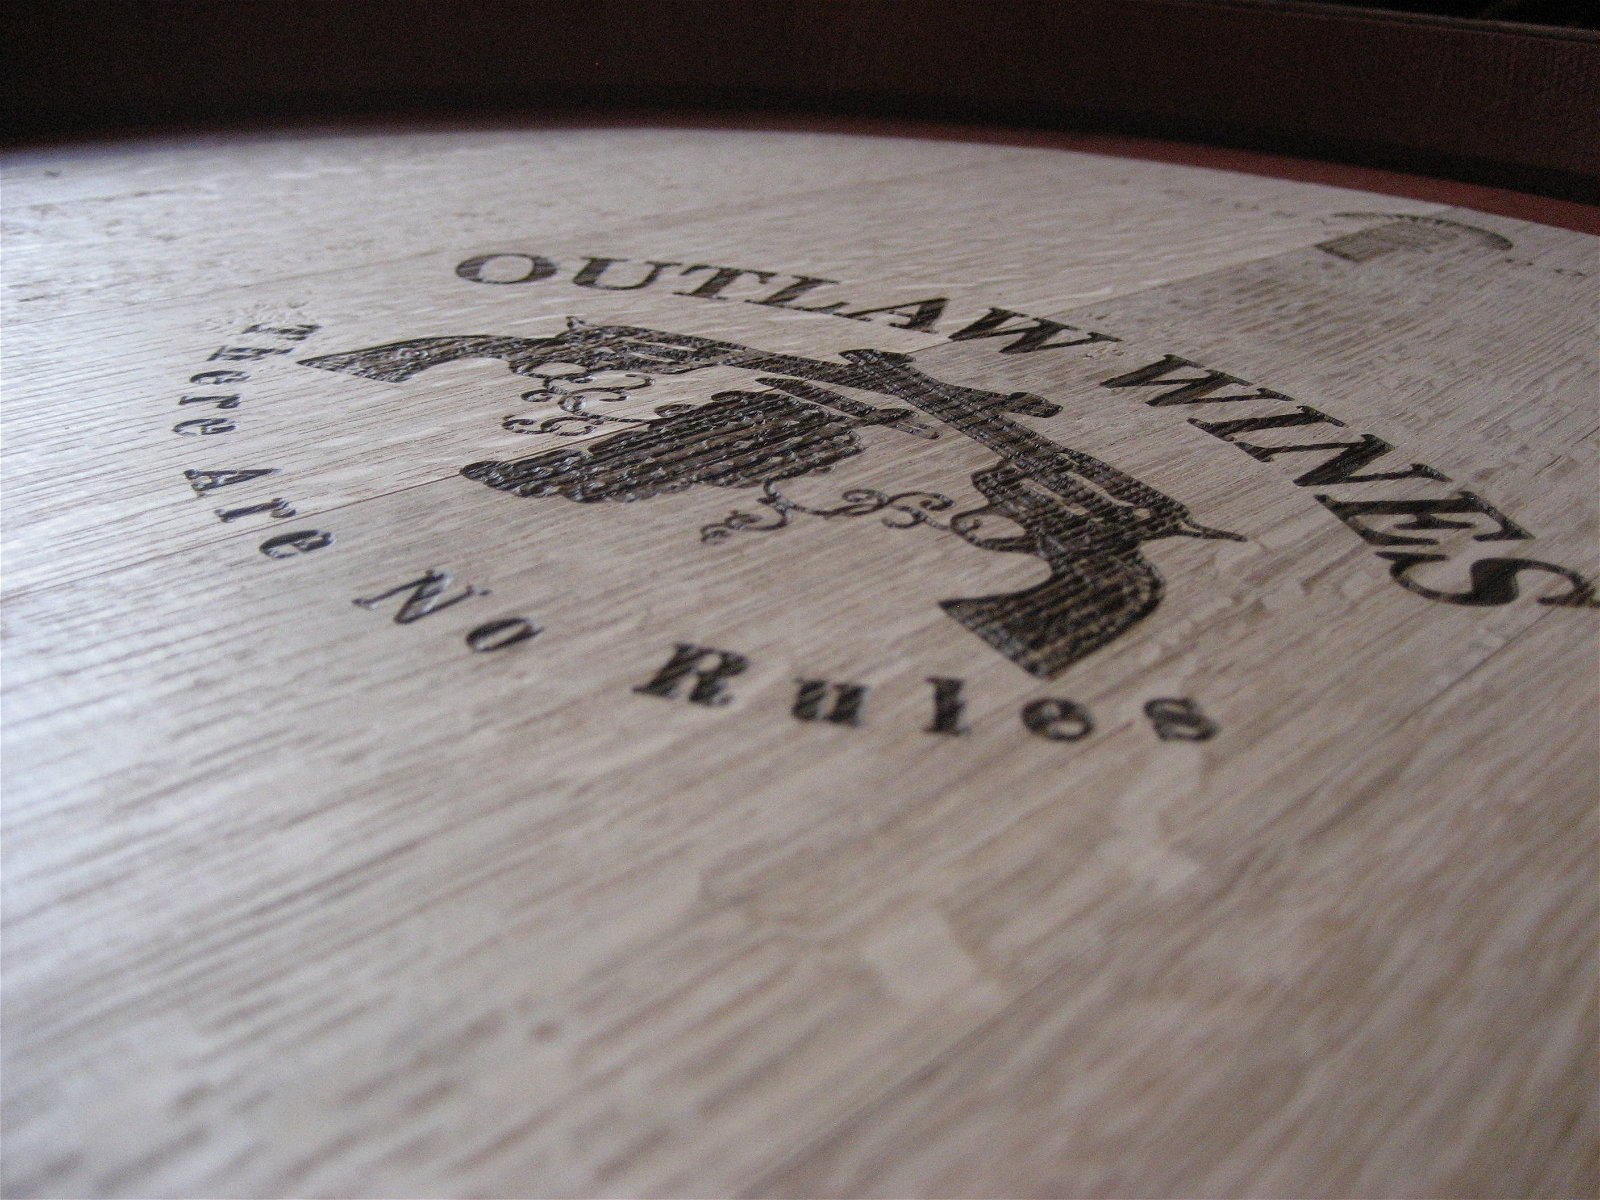 Outlaw Wines - Great Ocean Road Tourism